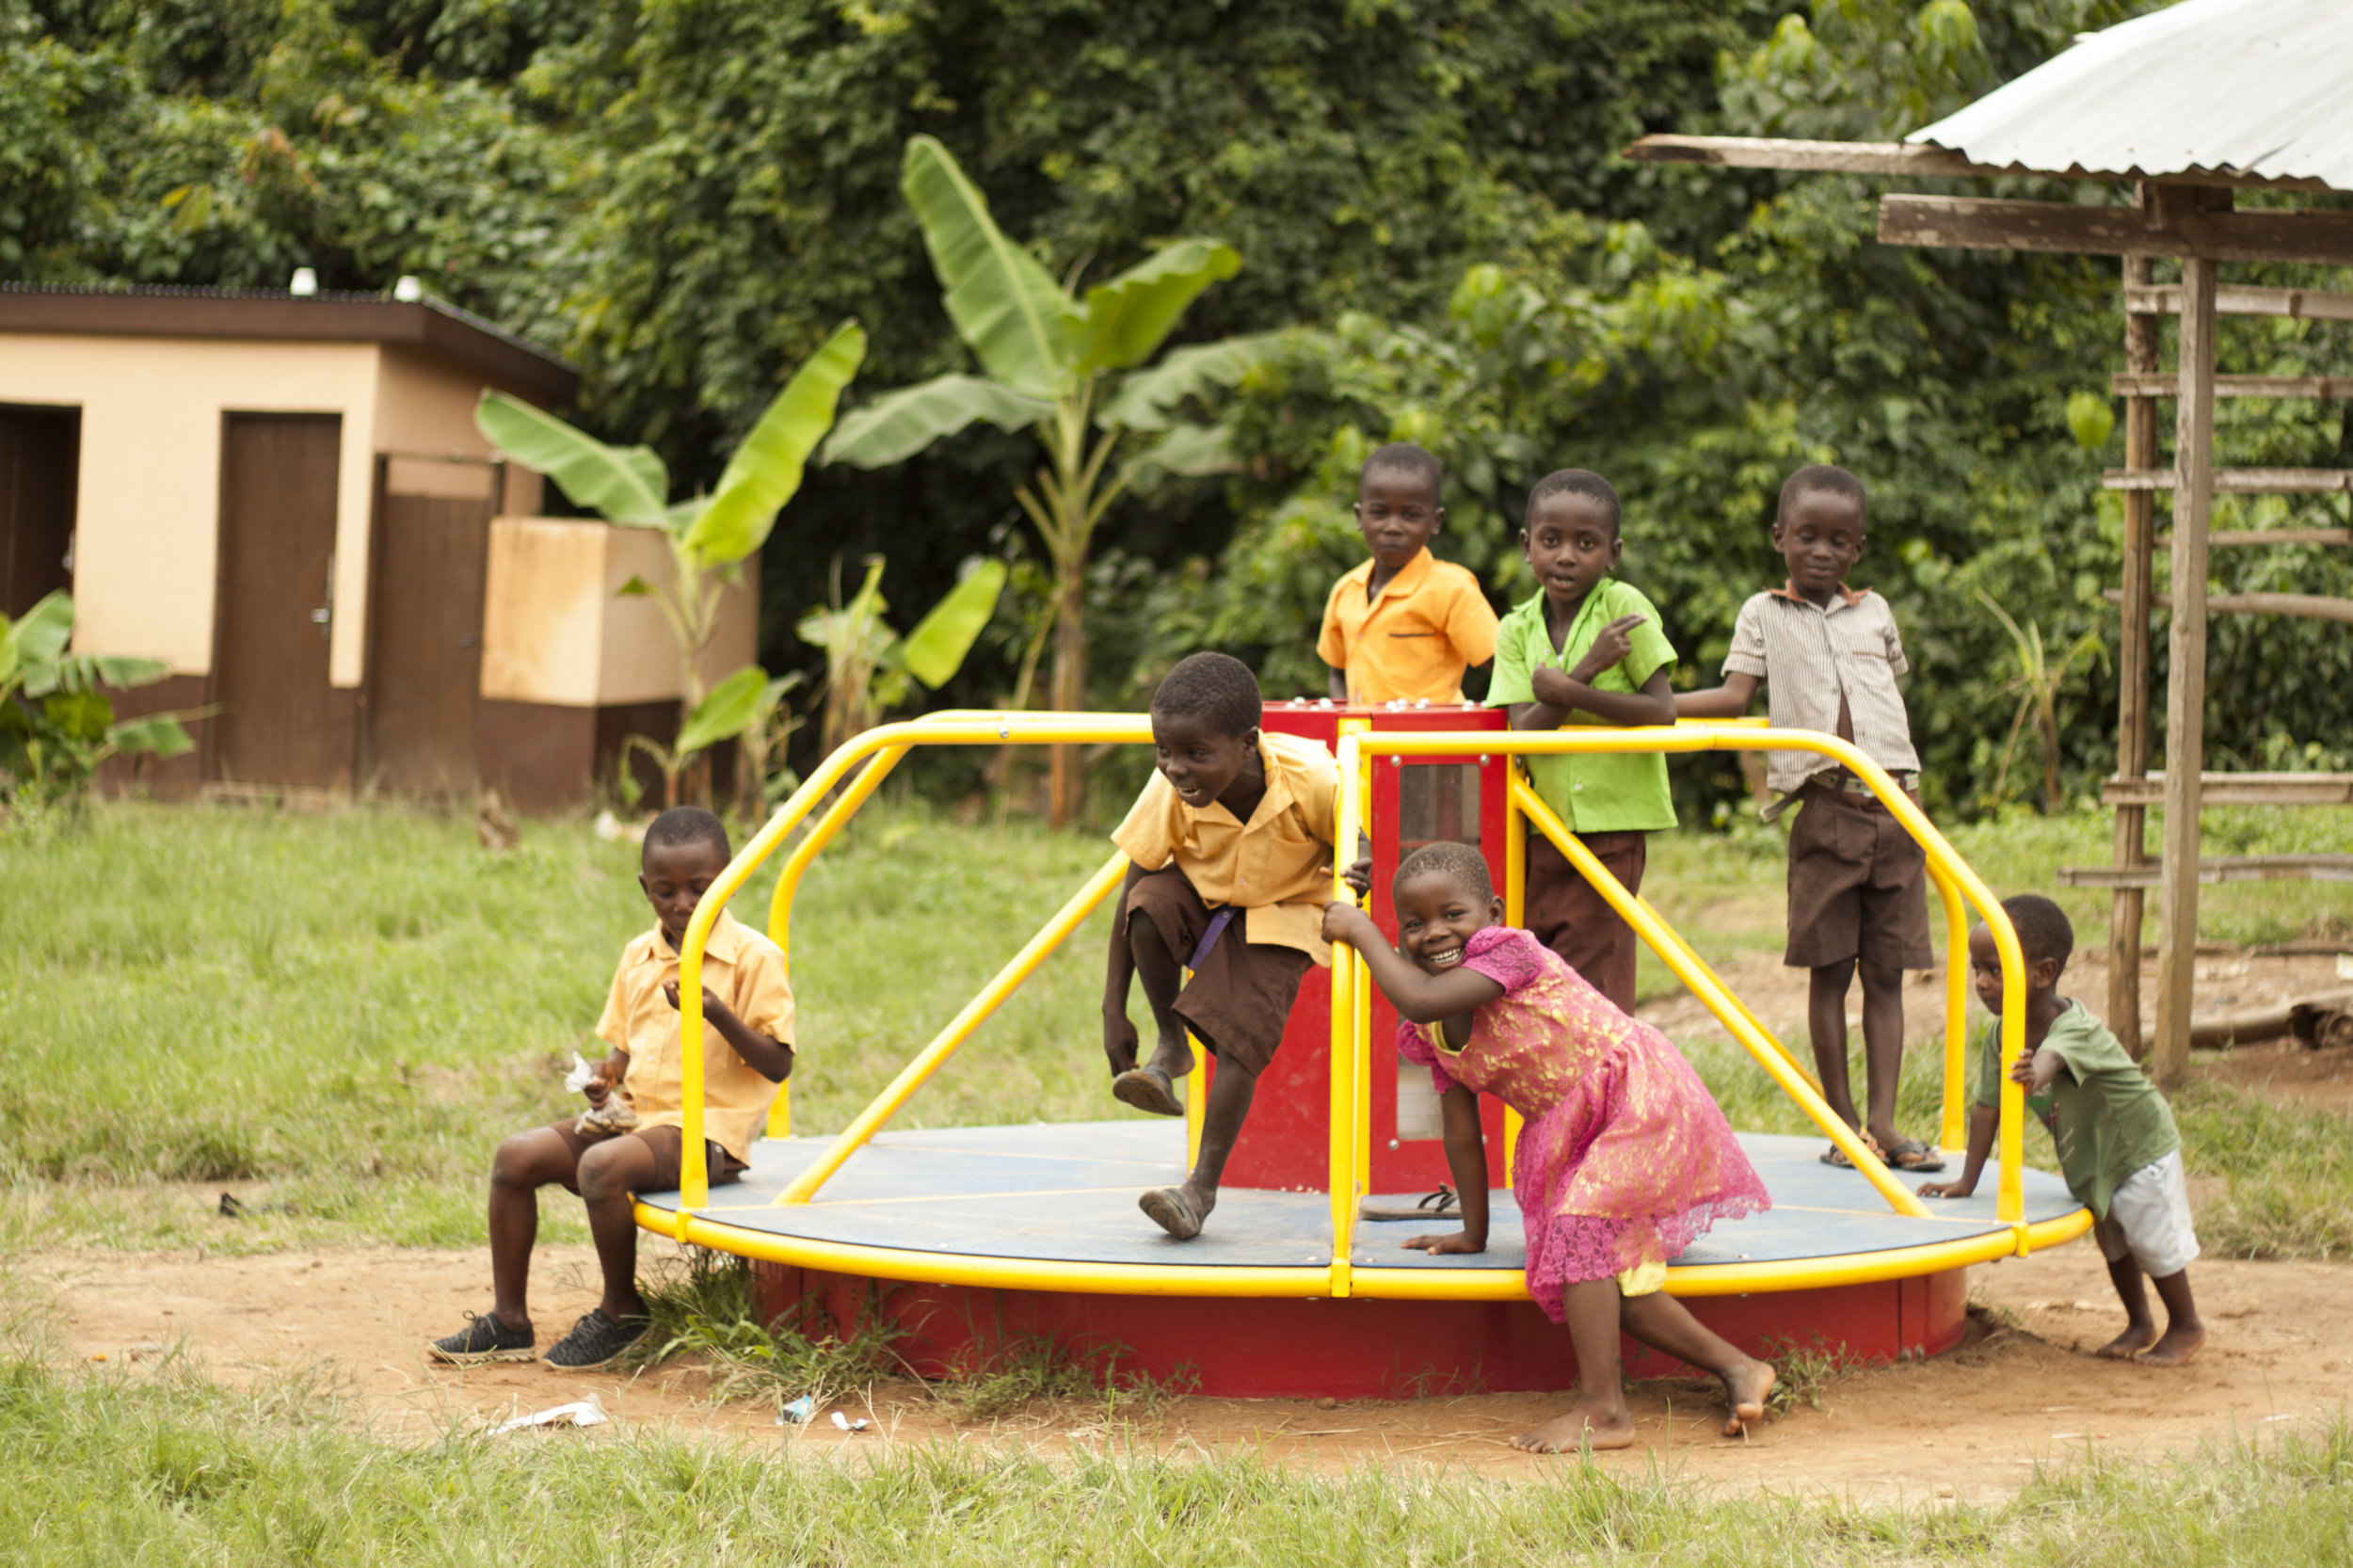 $10,000 - Provides a merry-go-round for a school